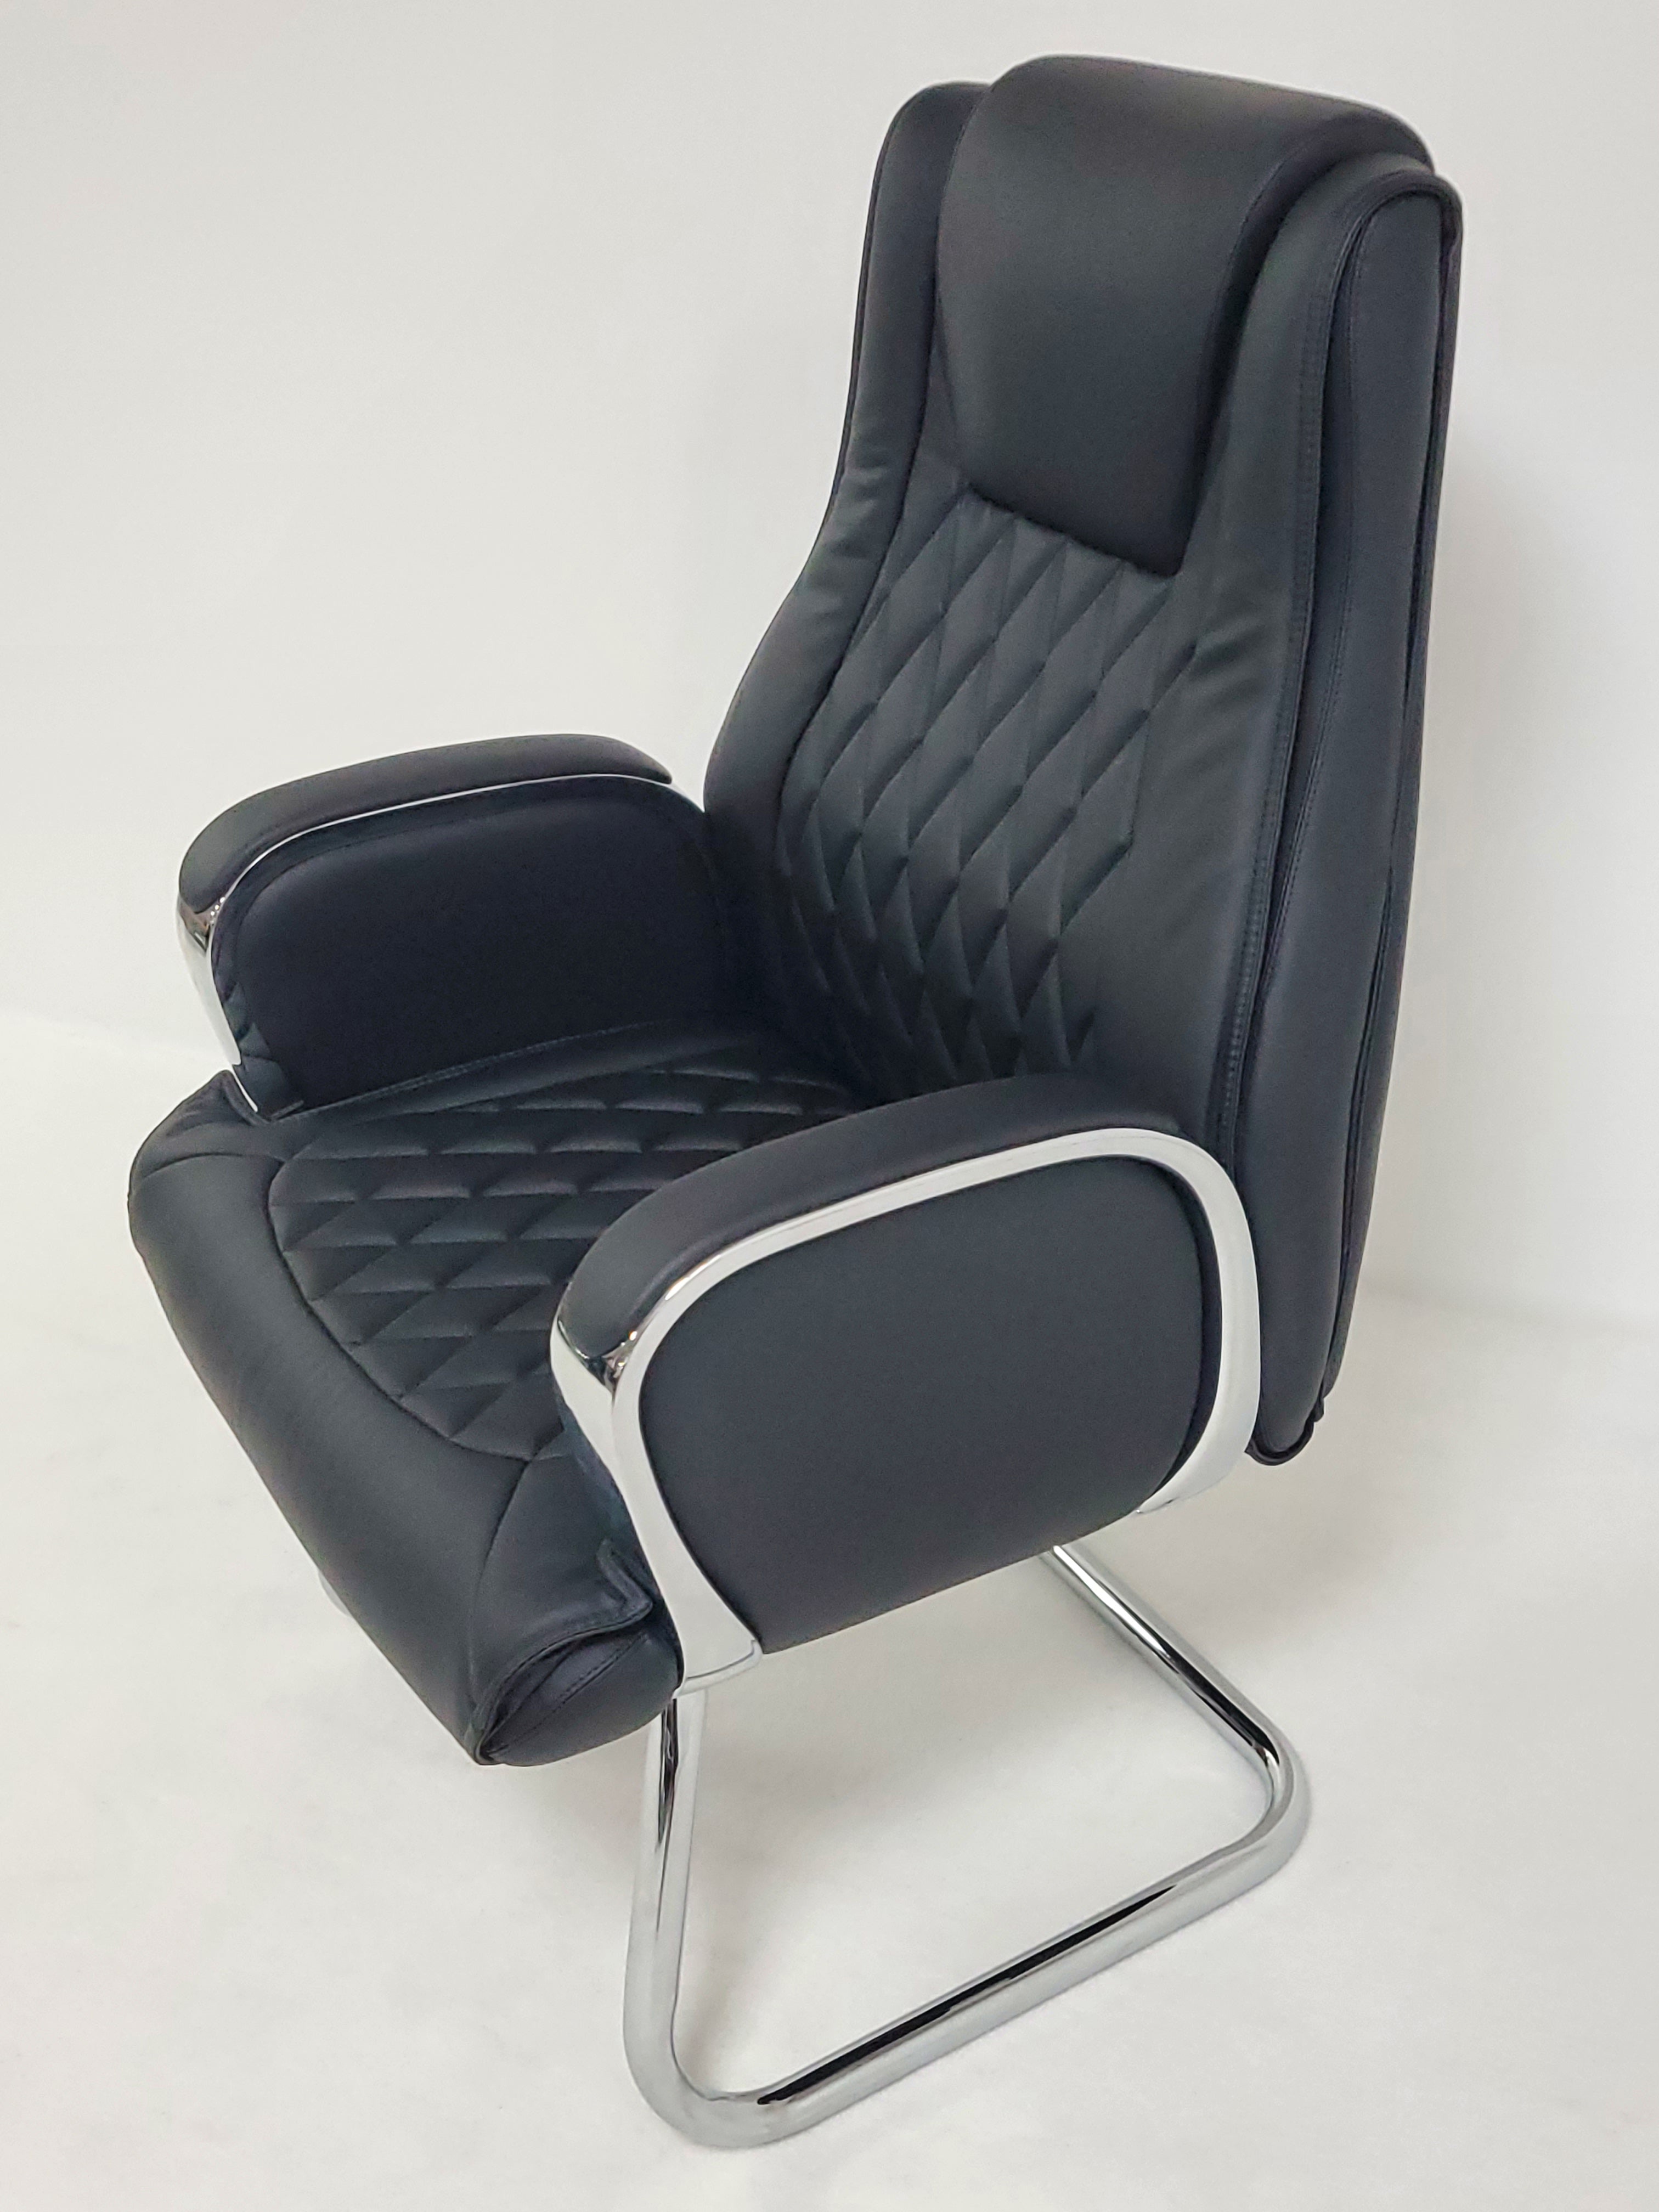 Heavy Duty Modern Black Leather Visitor Chair with Chrome Arms - CHA-1202C